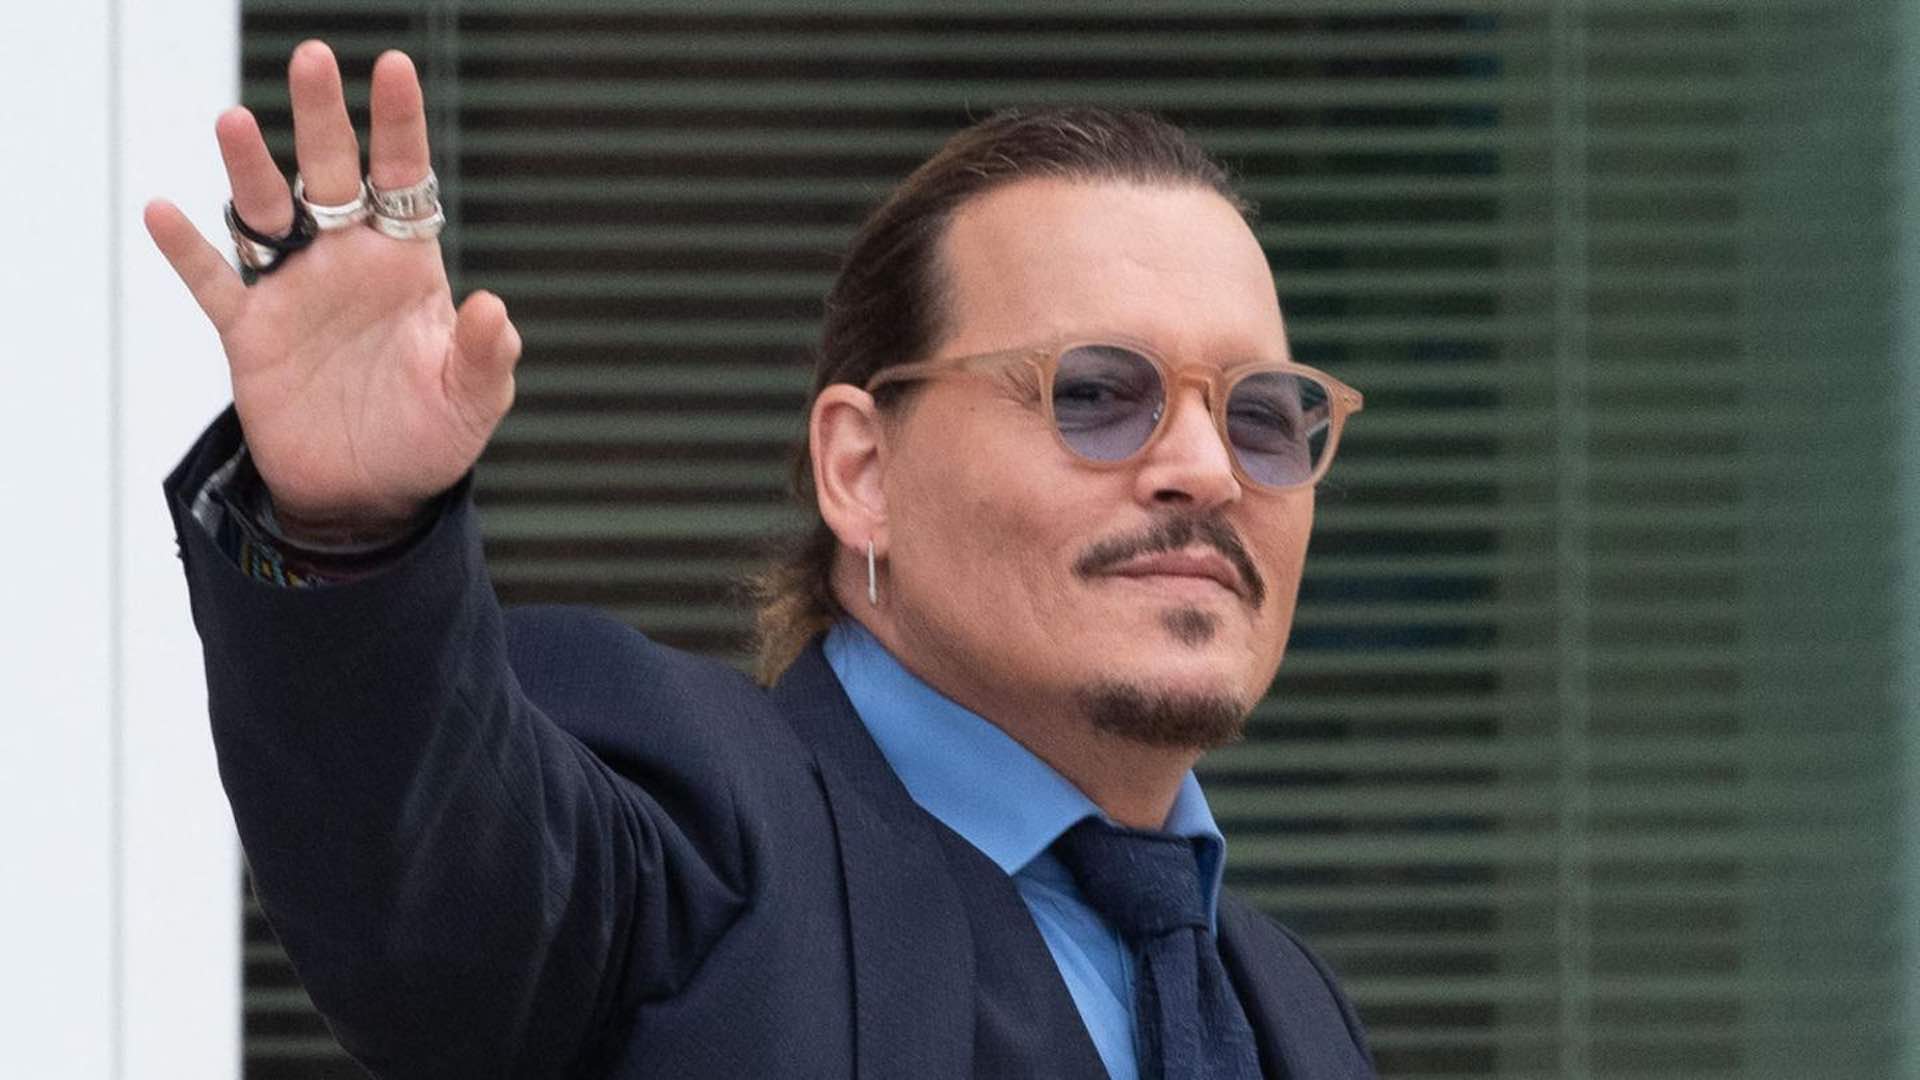 Johnny Depp donates  million to charity from the sale of NFTs